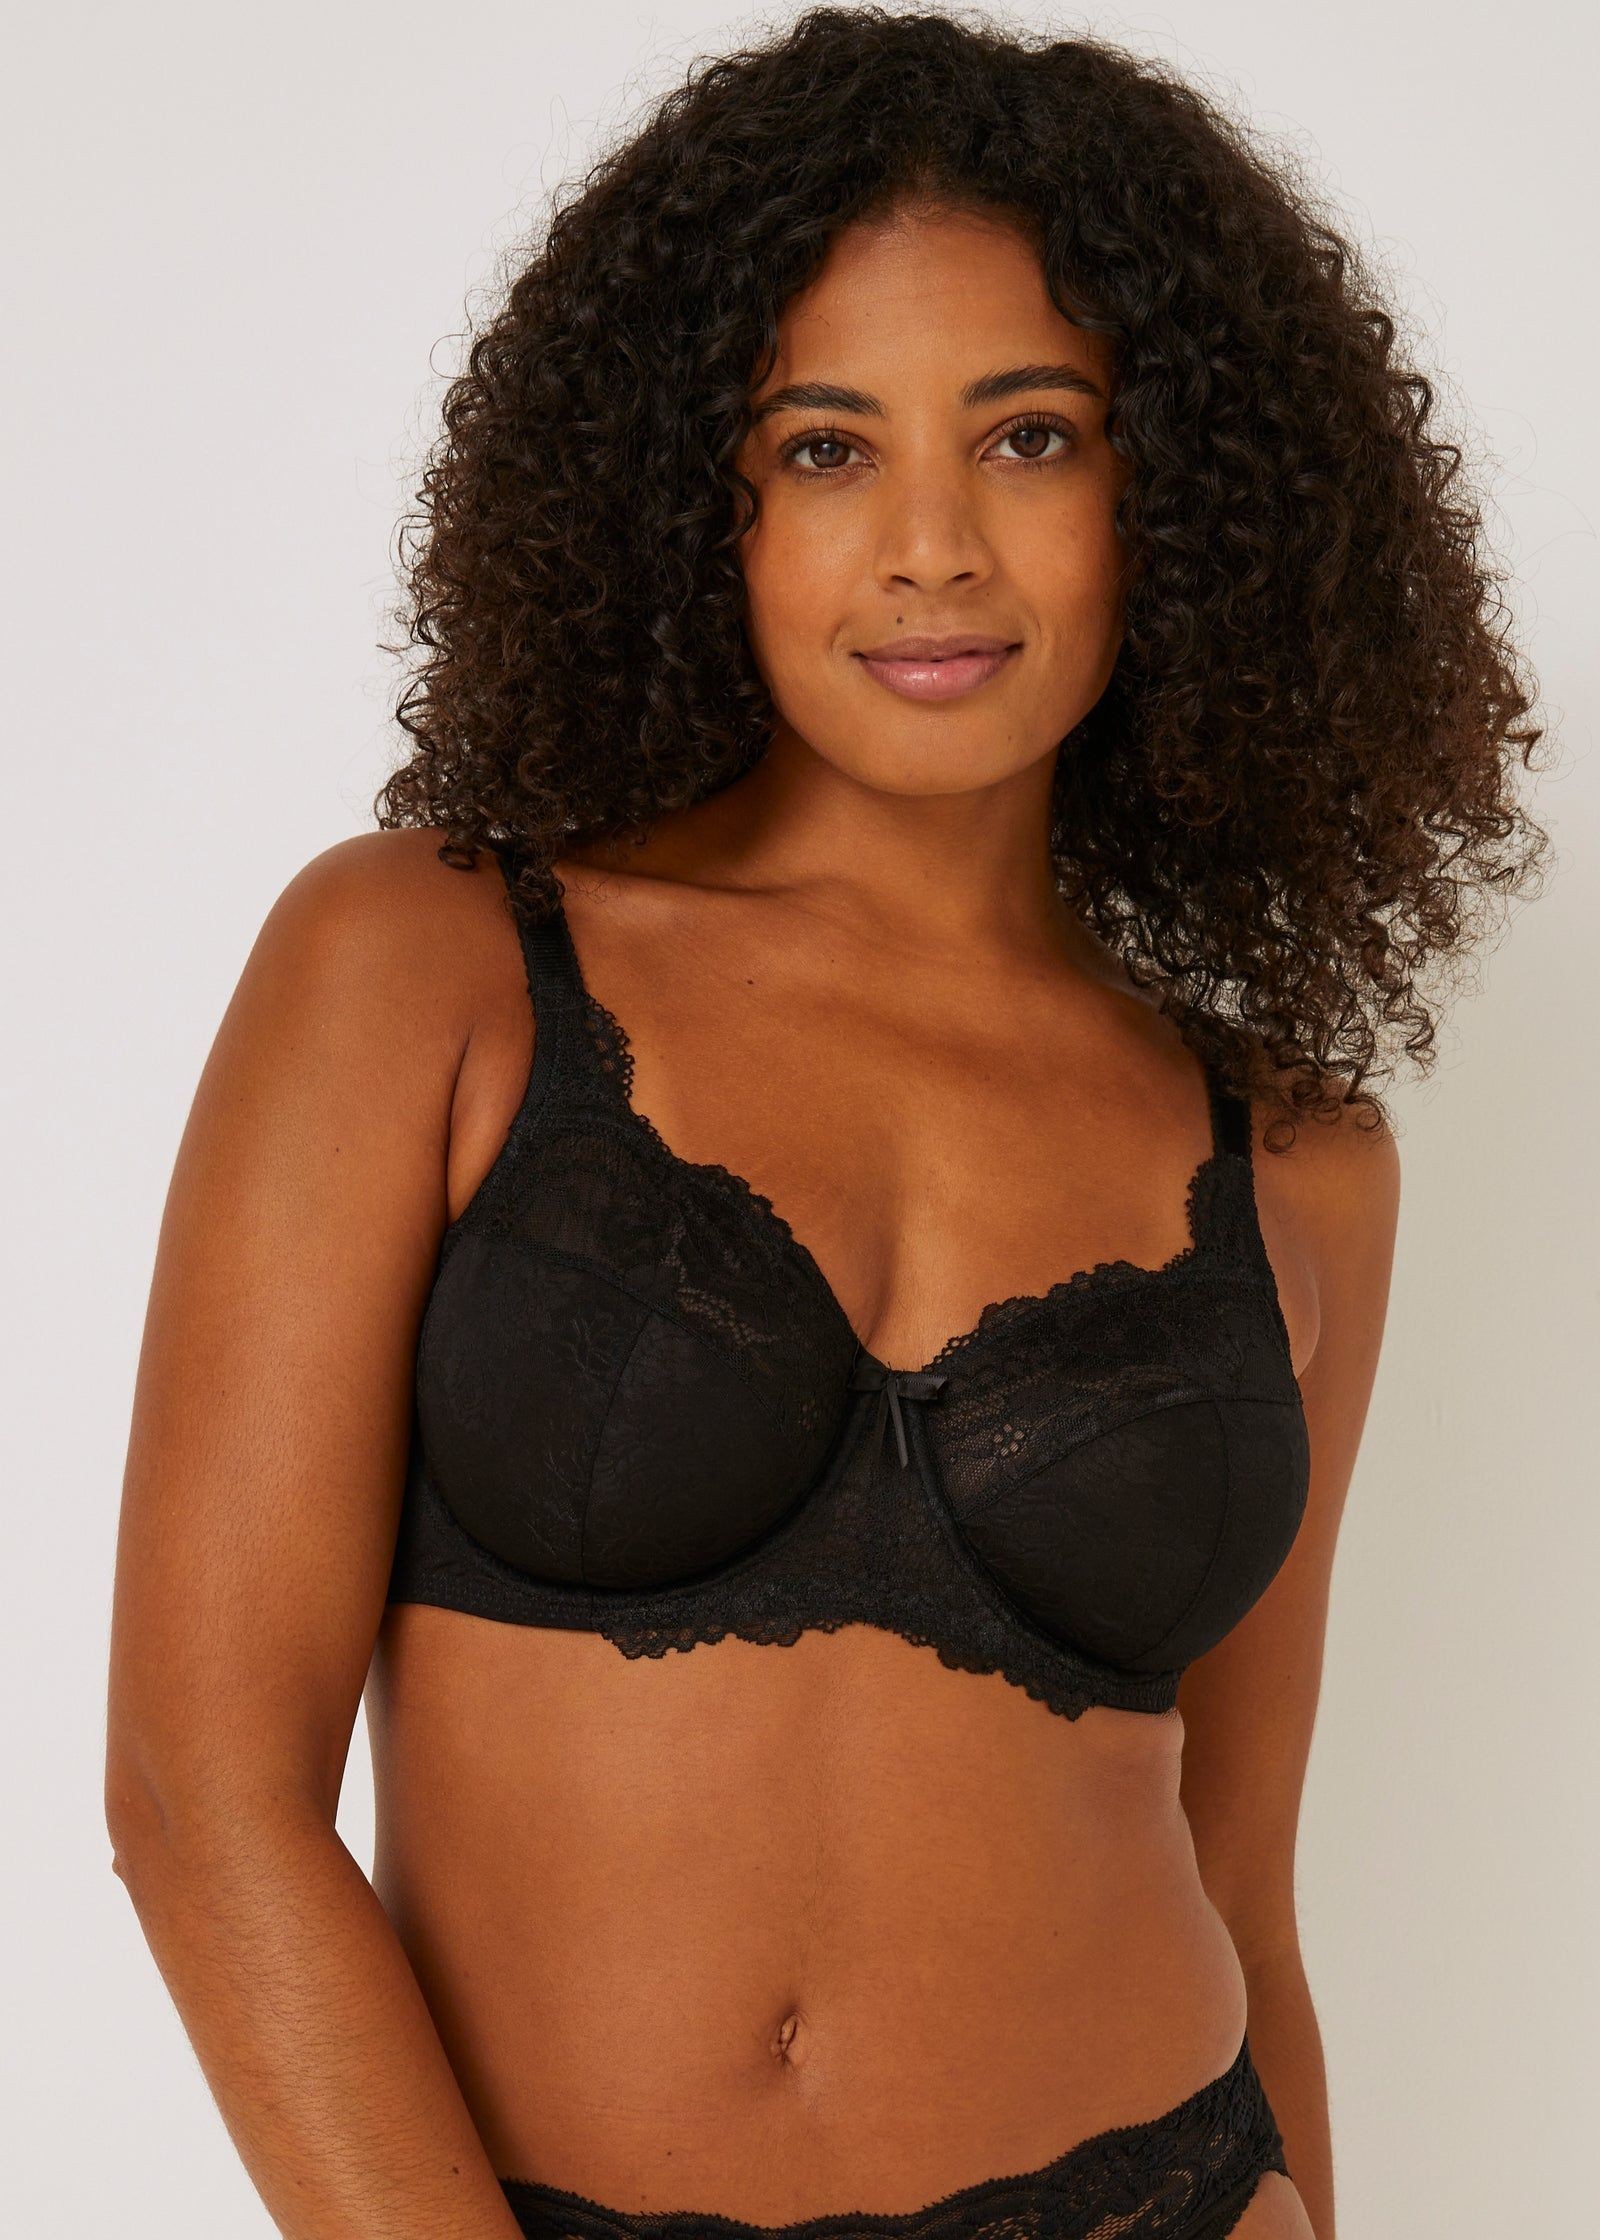 Buy DD+ Pink Lace Detail Bra Online in UAE from Matalan